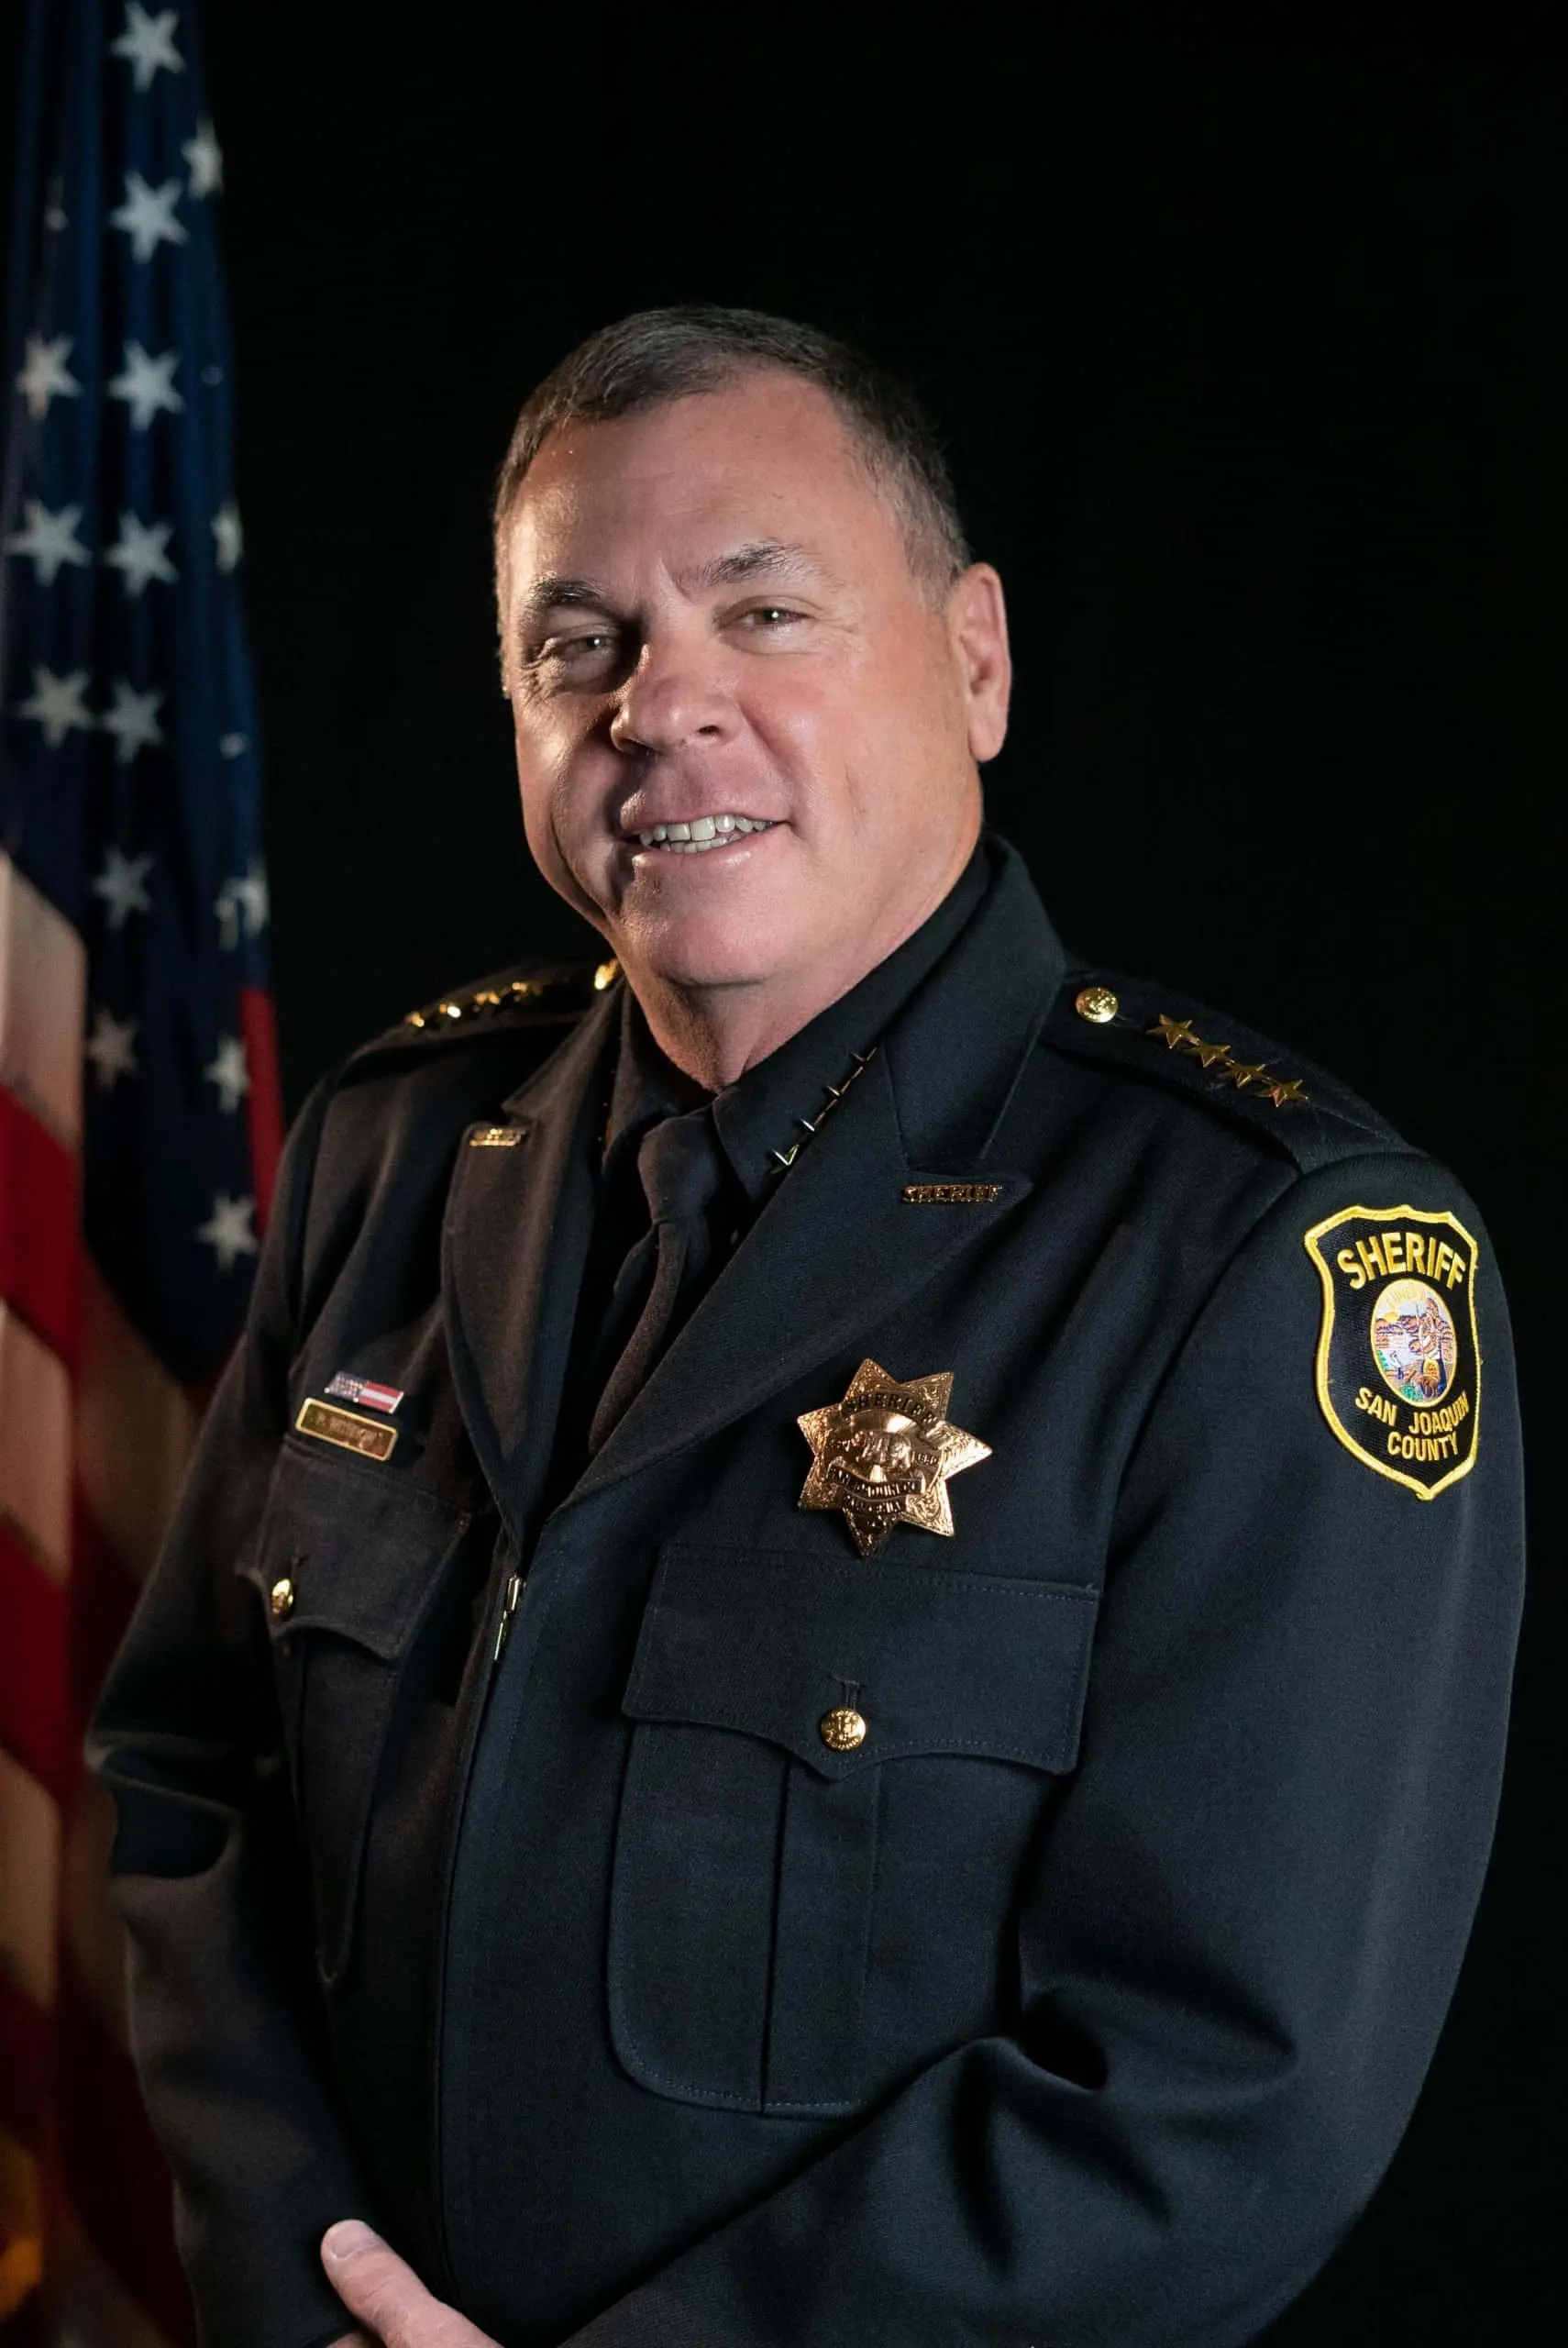 Patrick Withrow, Sheriff for San Joaquin County Sheriff's Office